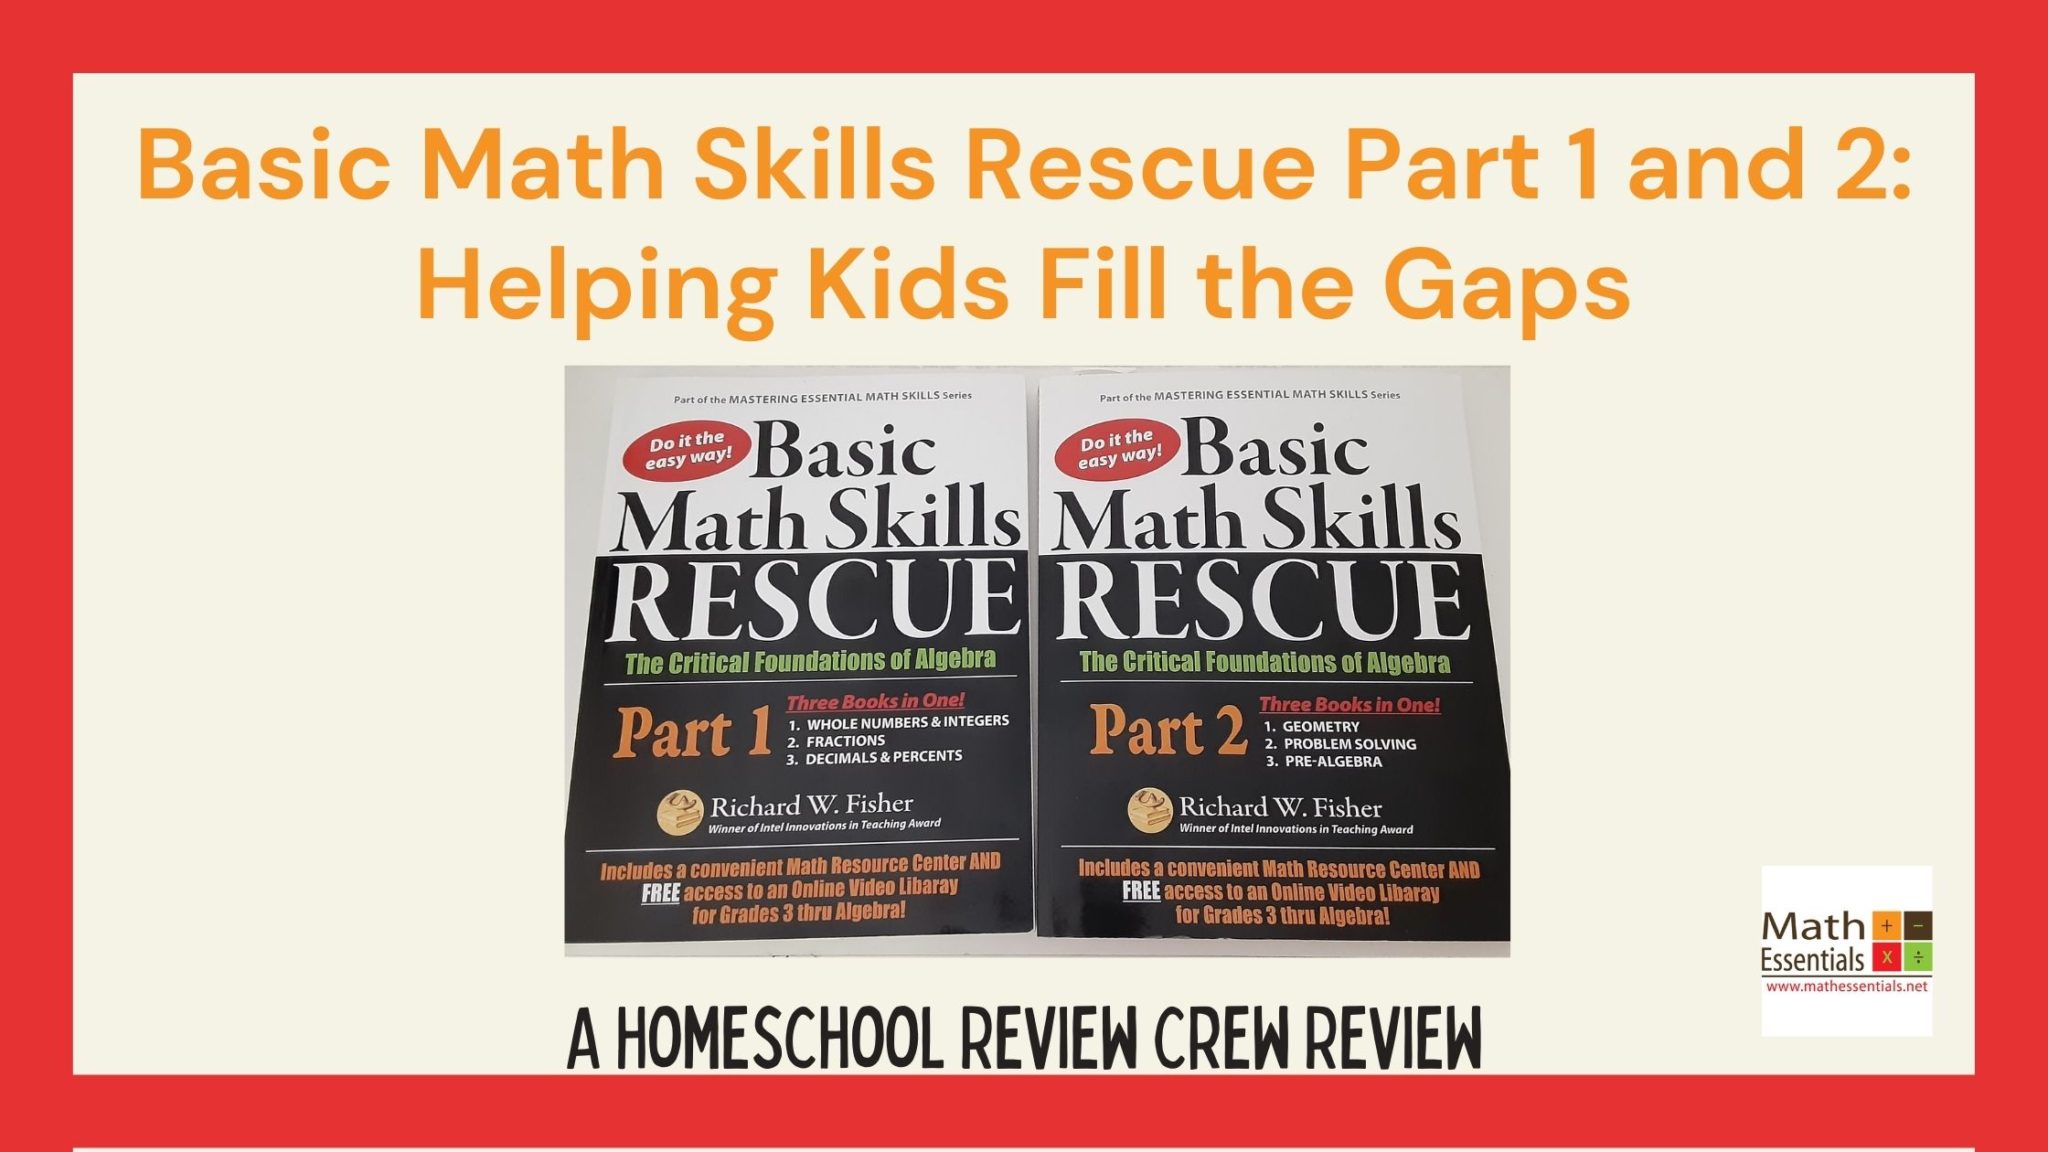 You are currently viewing Basic Math Skills Rescue Part 1 and 2: Helping Kids Fill the Gaps